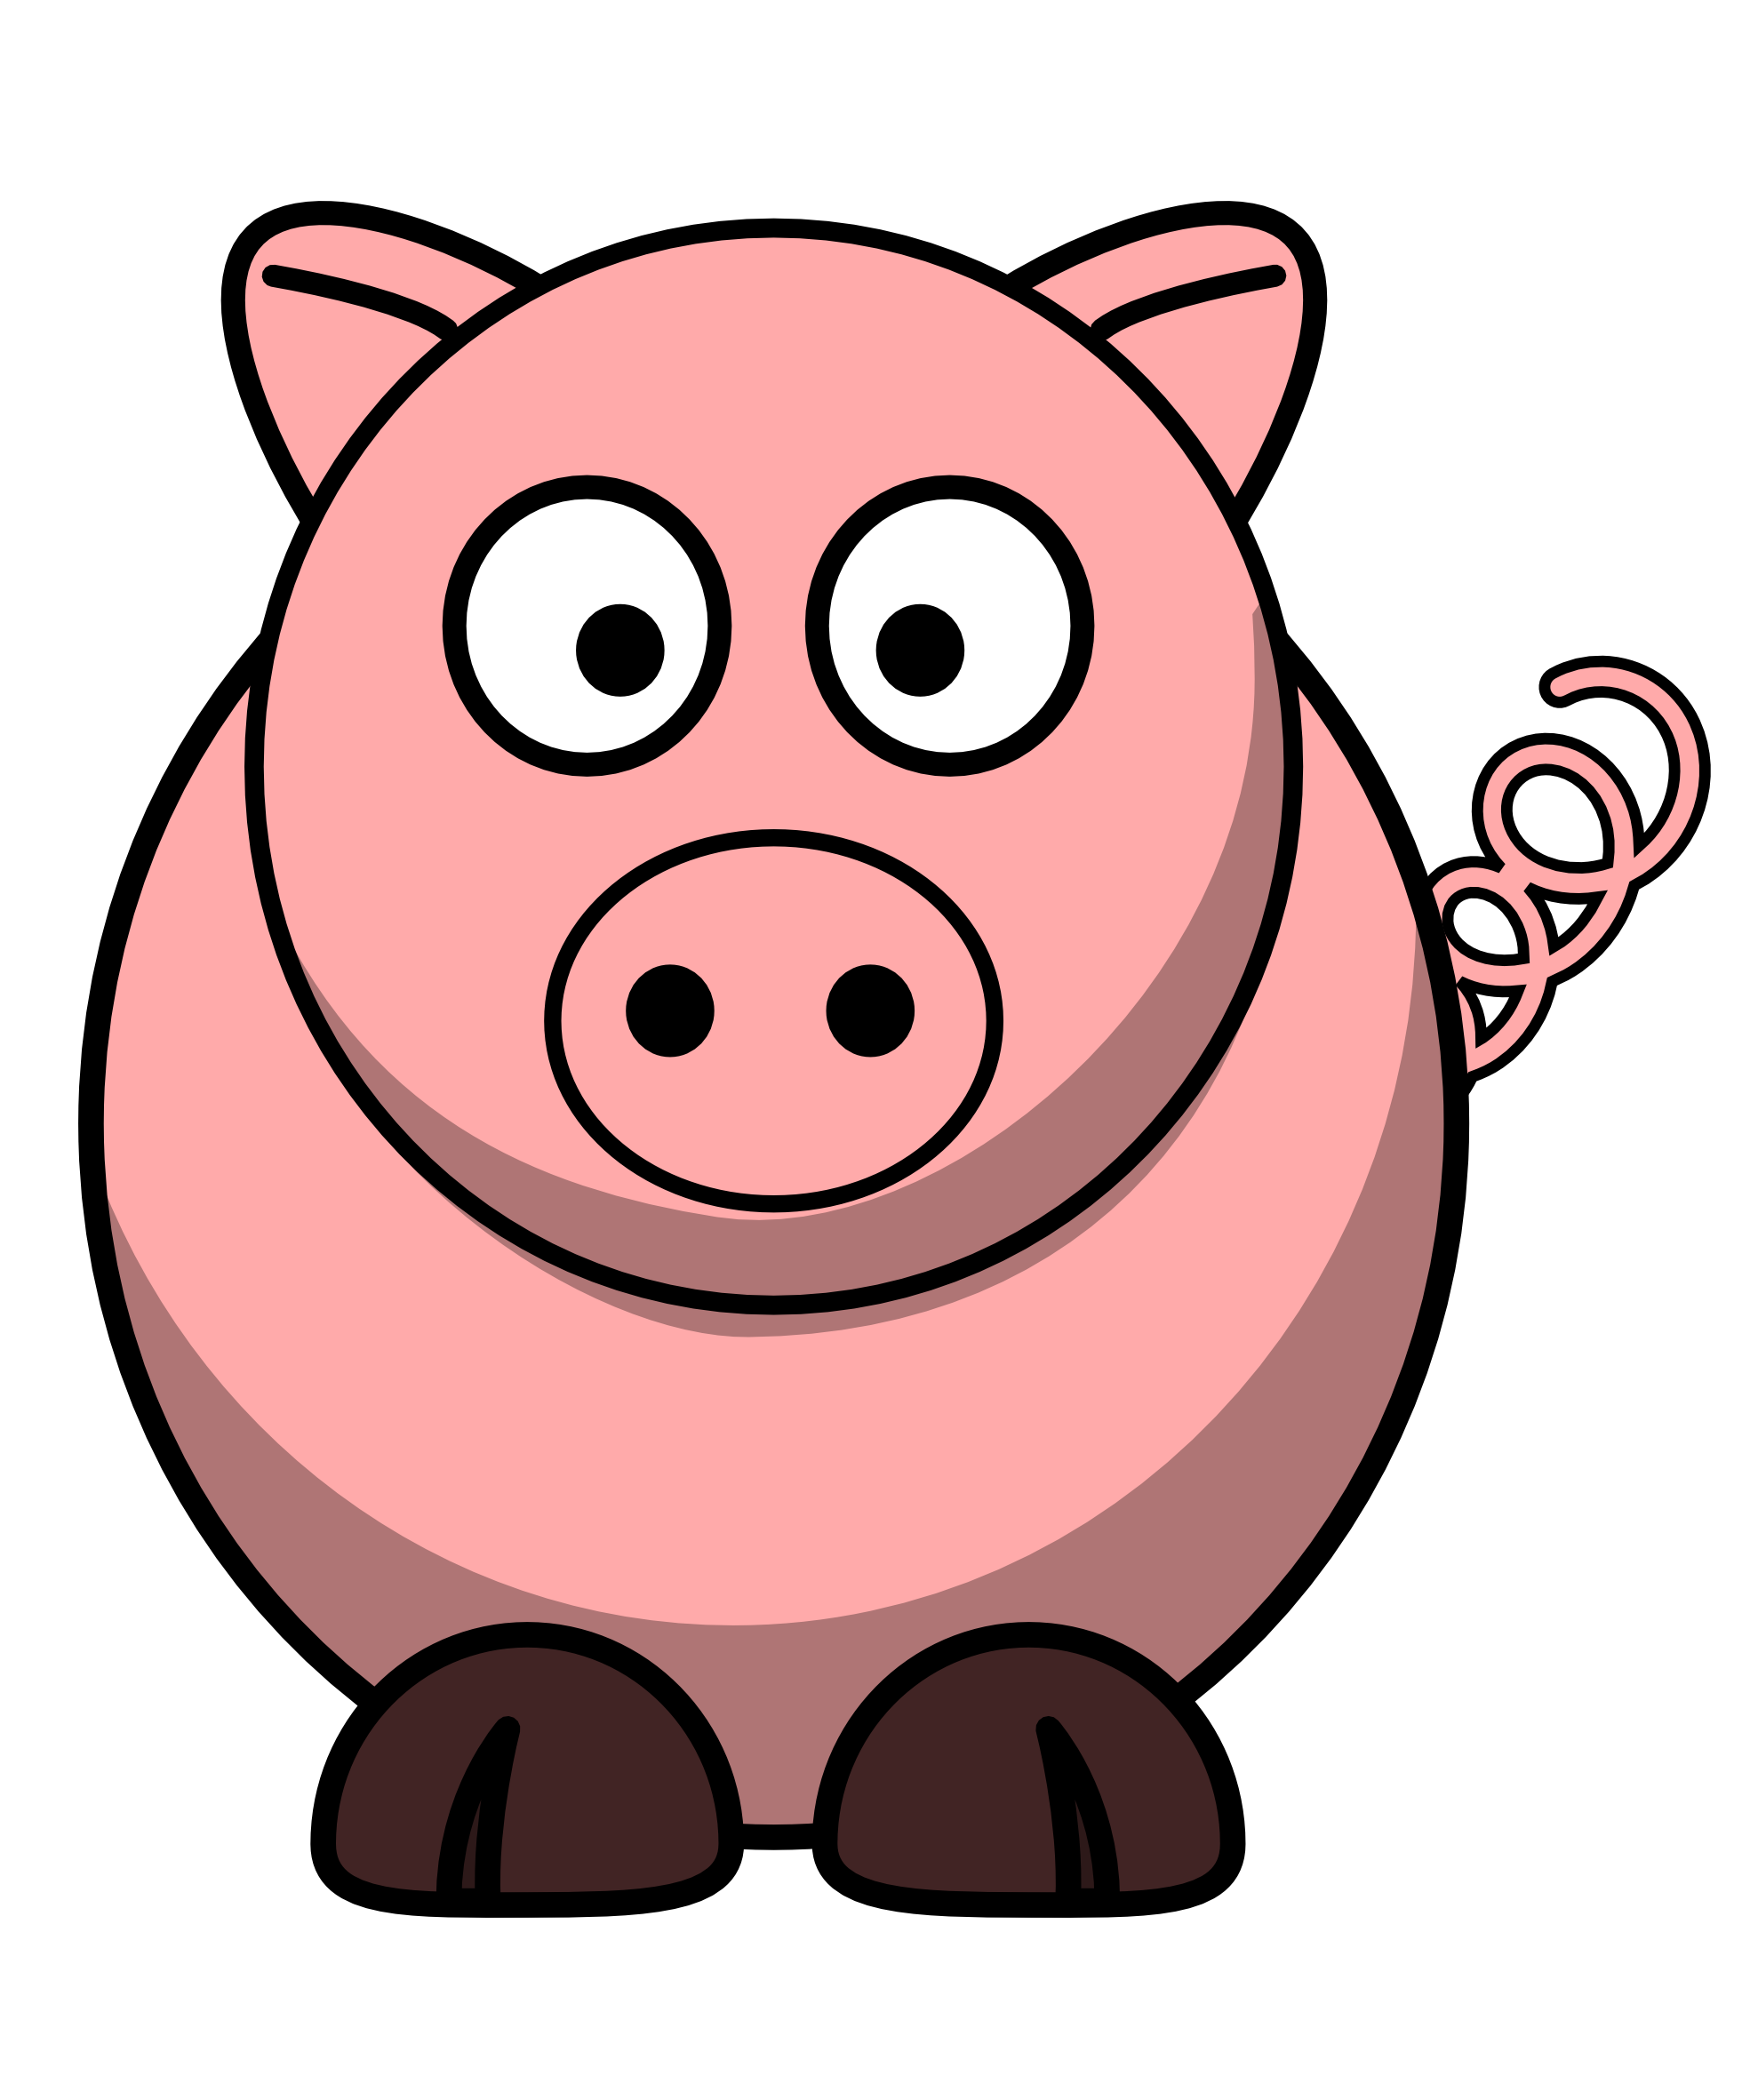 Pig Graphics - Clipart library